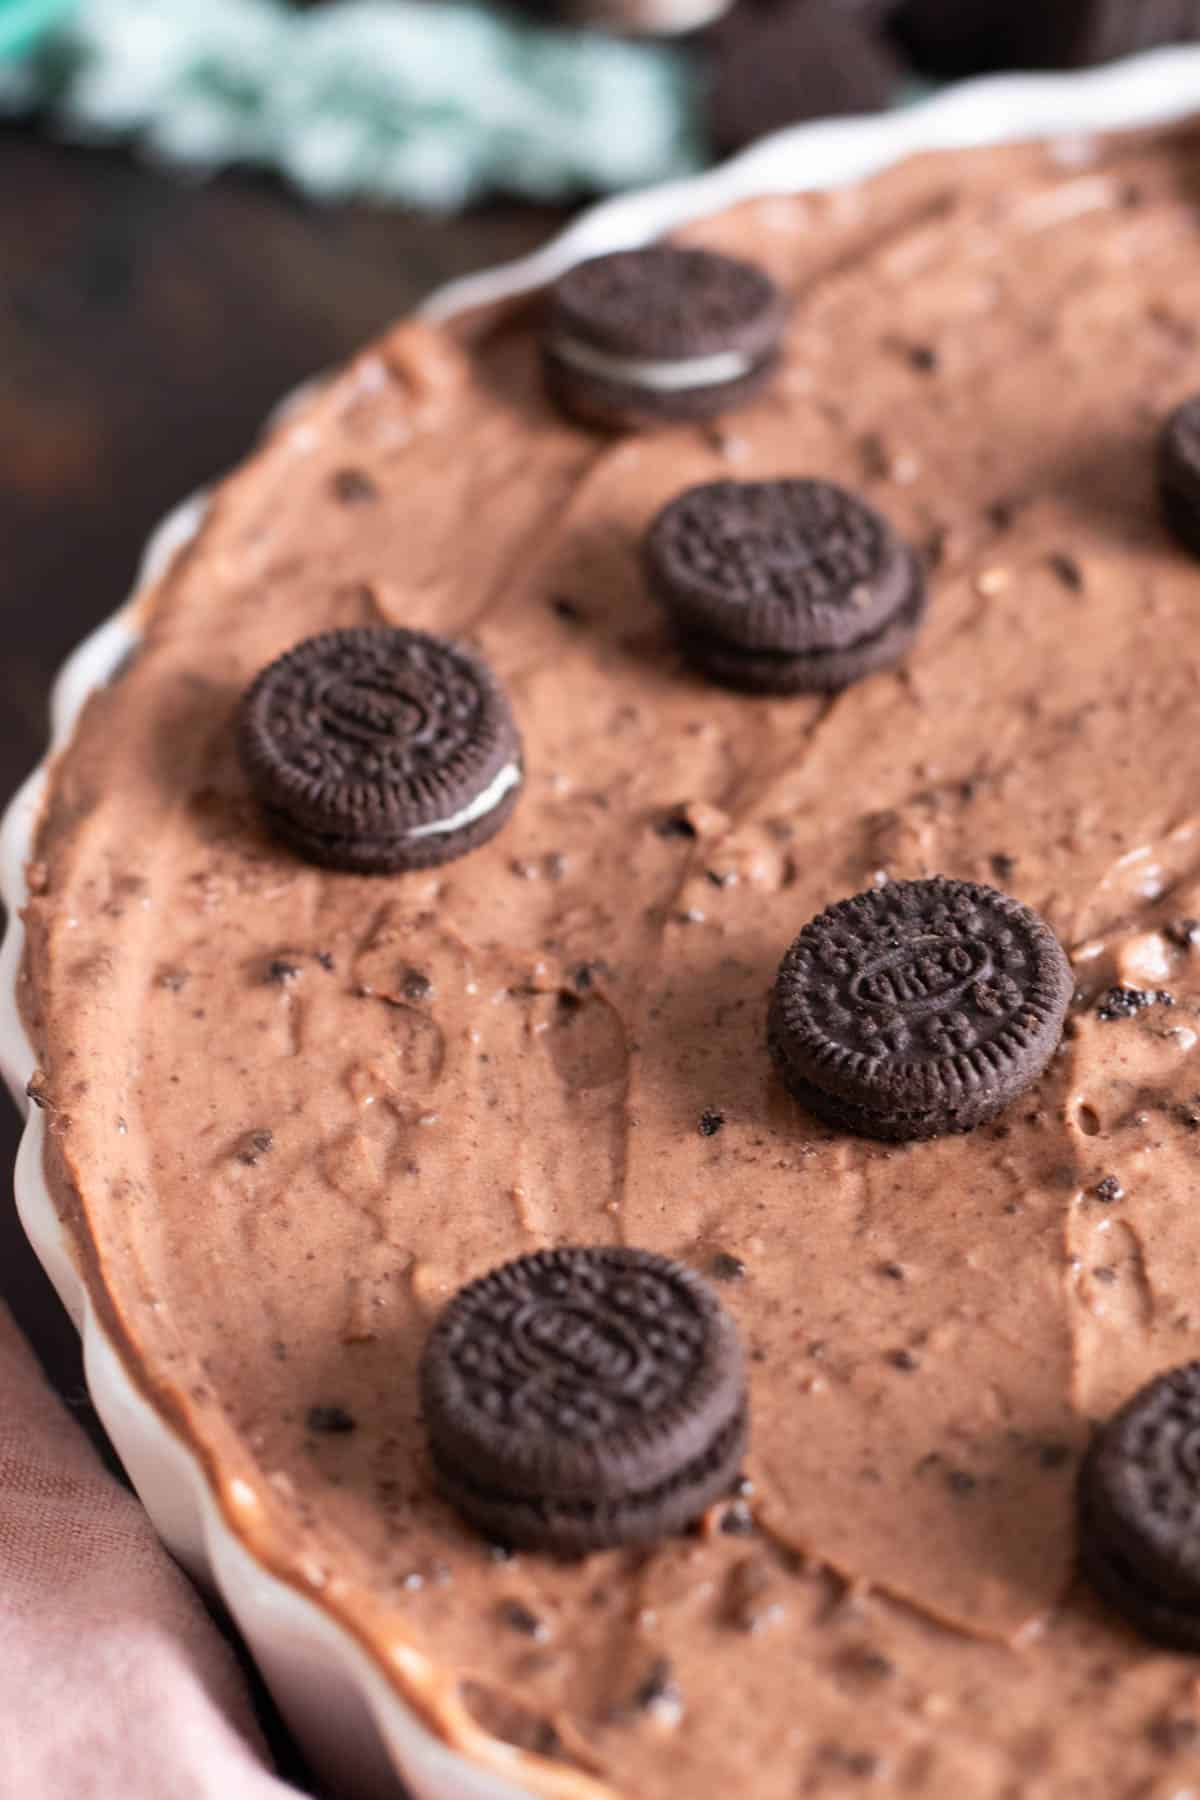 An Oreo dirt pie covered with small Oreos.